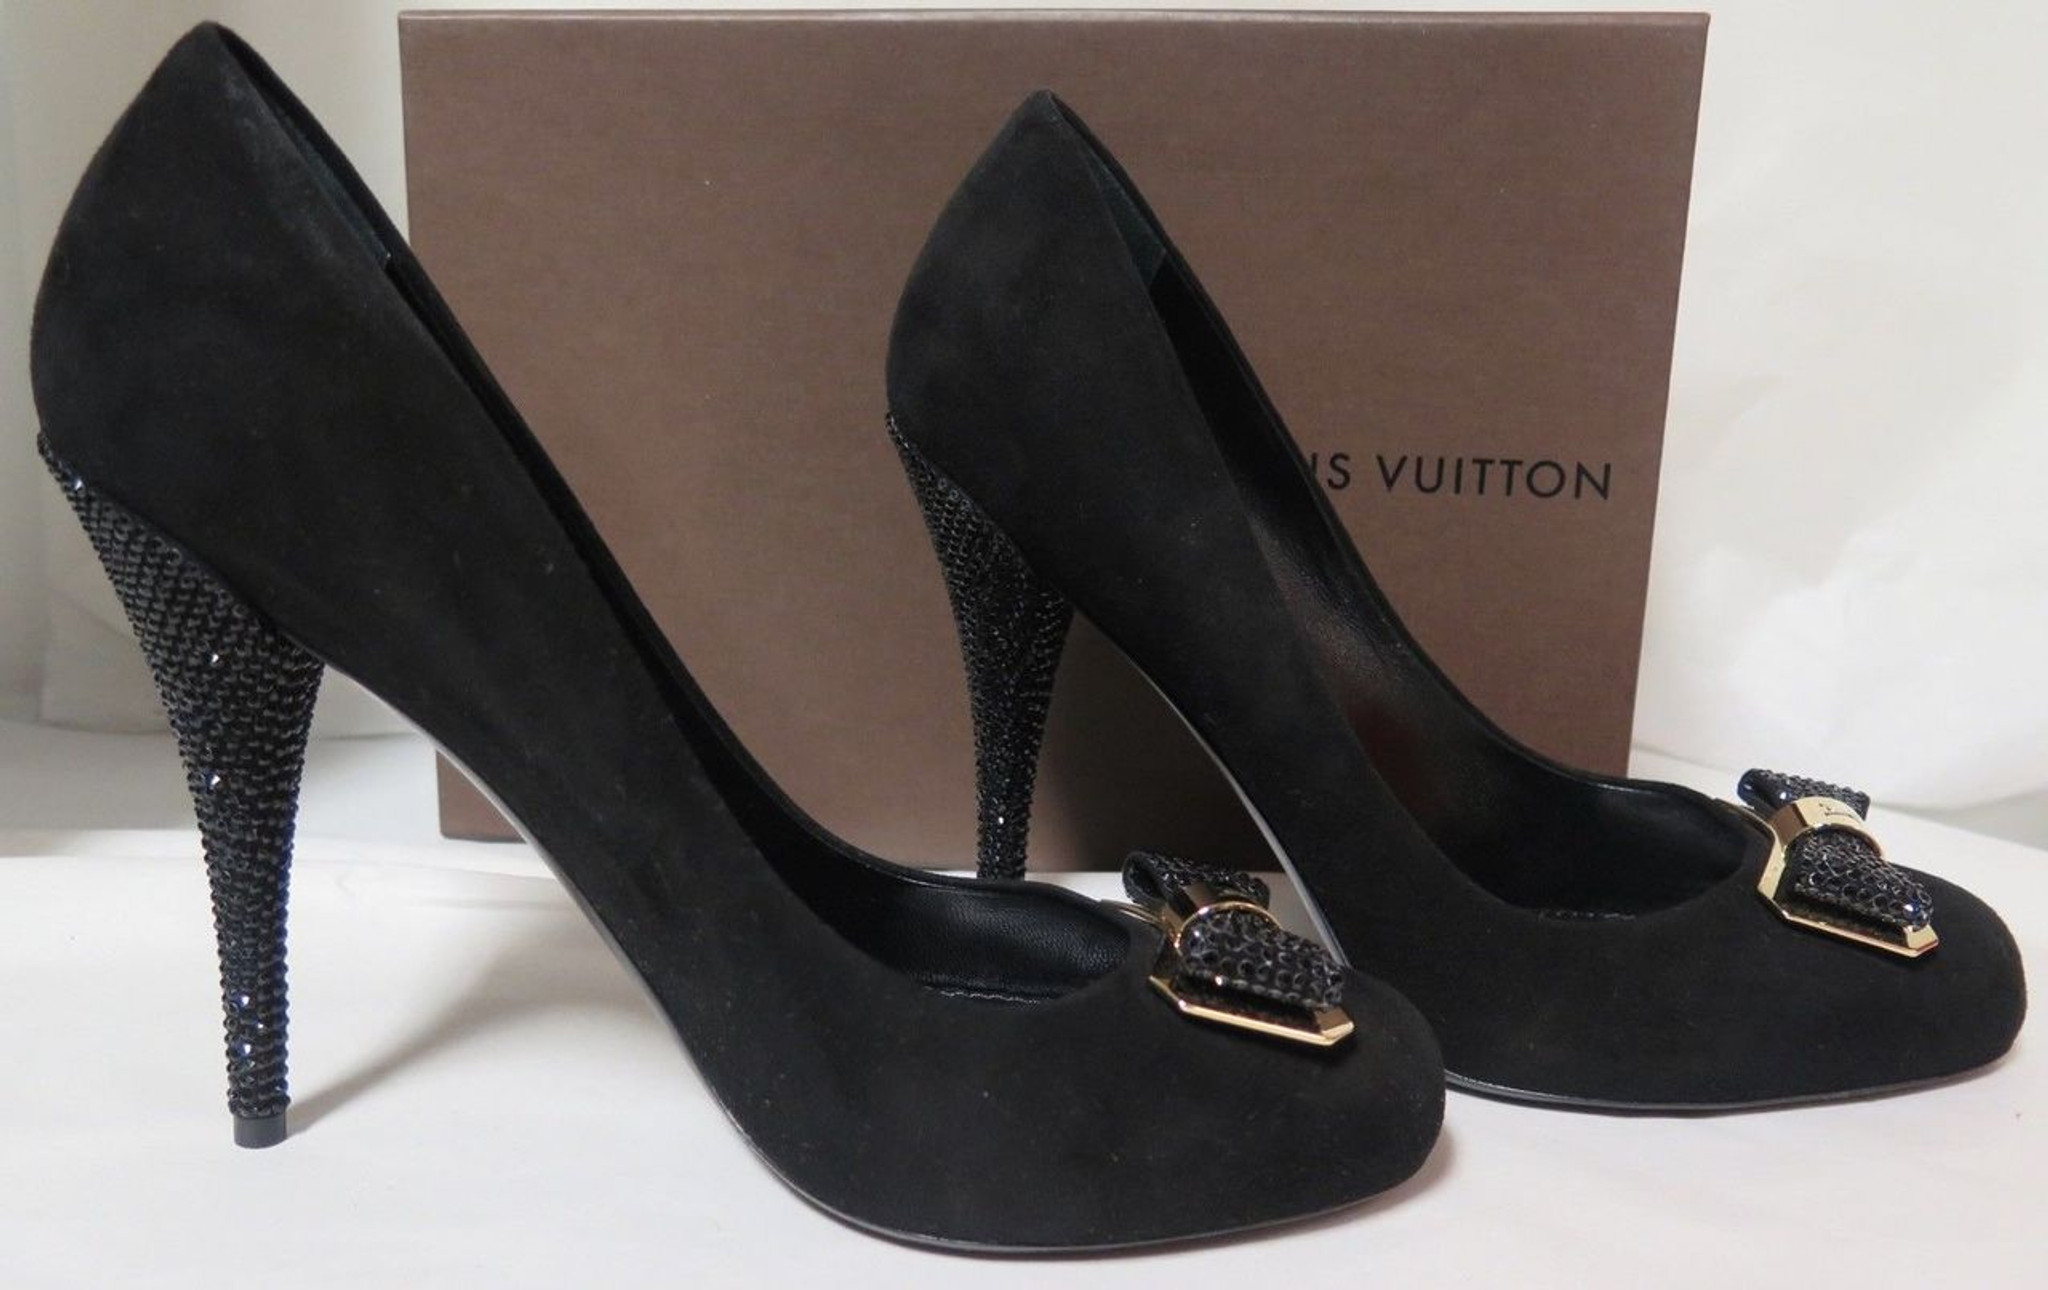 Louis Vuitton Black 4.5 inch Crystal Heels in Size 39.5 Worn Once In Box